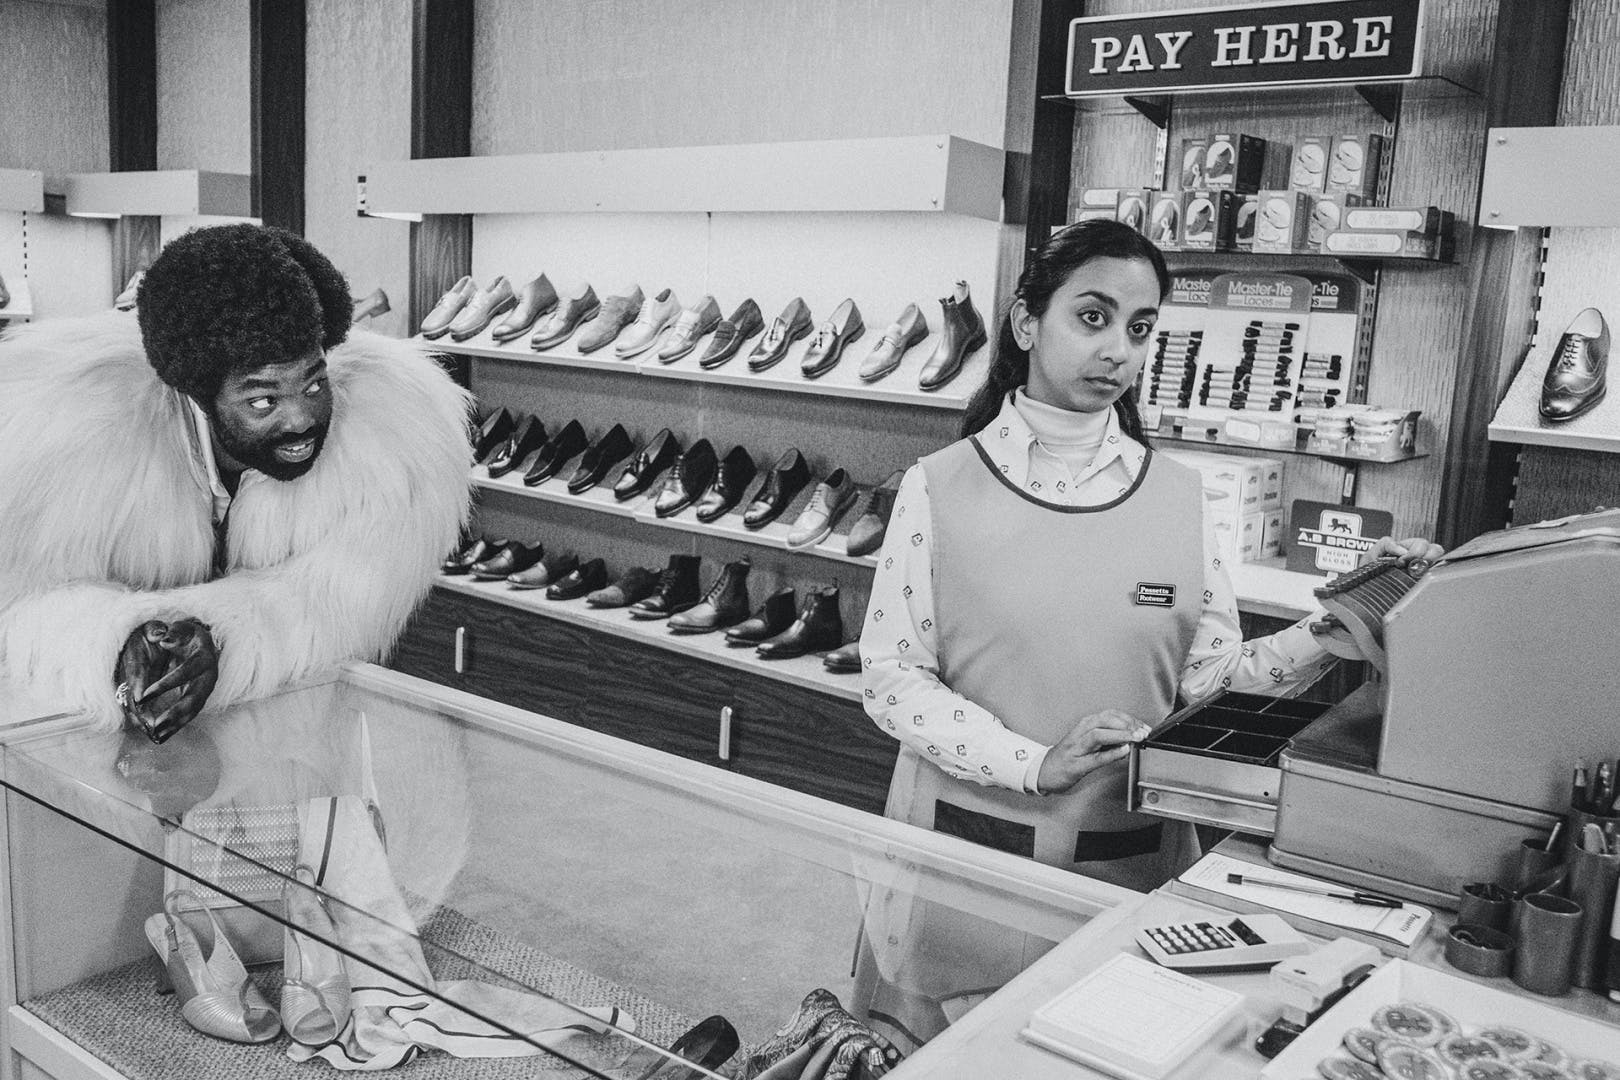 Black and white photograph by David Hurn showing Black Mirror stars Paapa Essiedu in a light feather jacket while leaning on a display case, next to co-star Anjana Vasan wearing a shop assistant's bib and collored shirt, standing over an open till in front of a rack of shoes